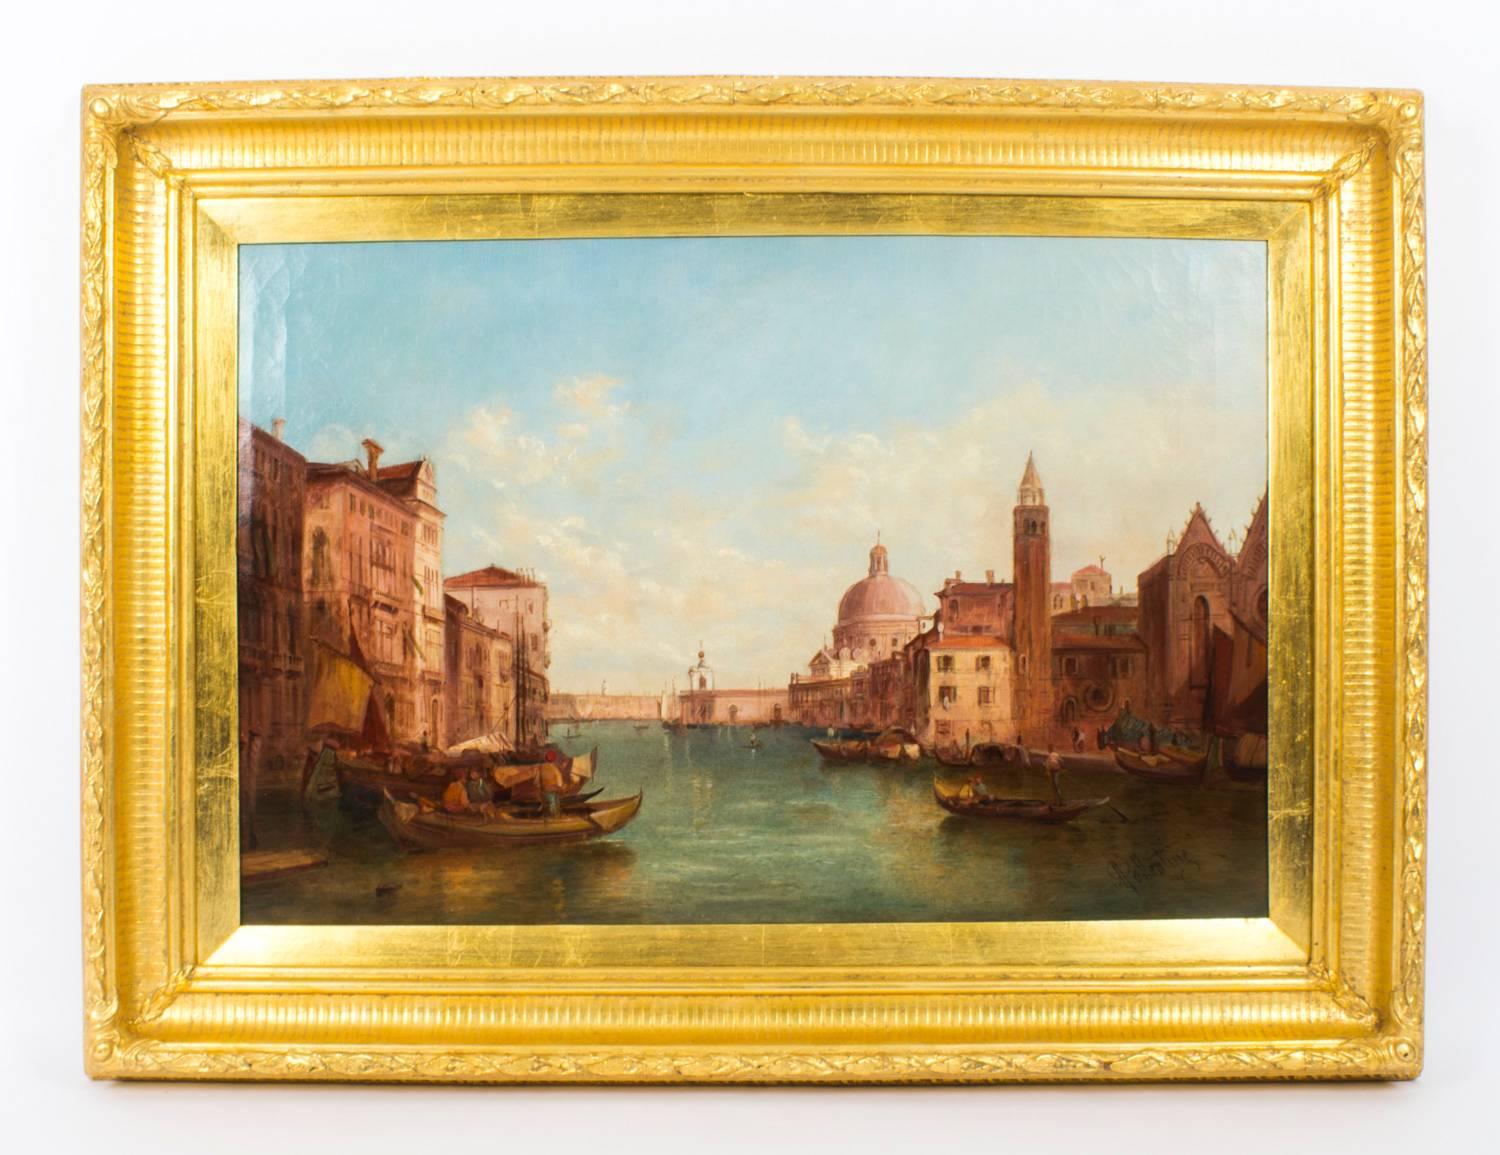 This is a lovely pair of oil on canvas paintings of the view of the Grand Canal in Venice by the renowned British artist Alfred Pollentine (1836-1890) and each is signed lower right 